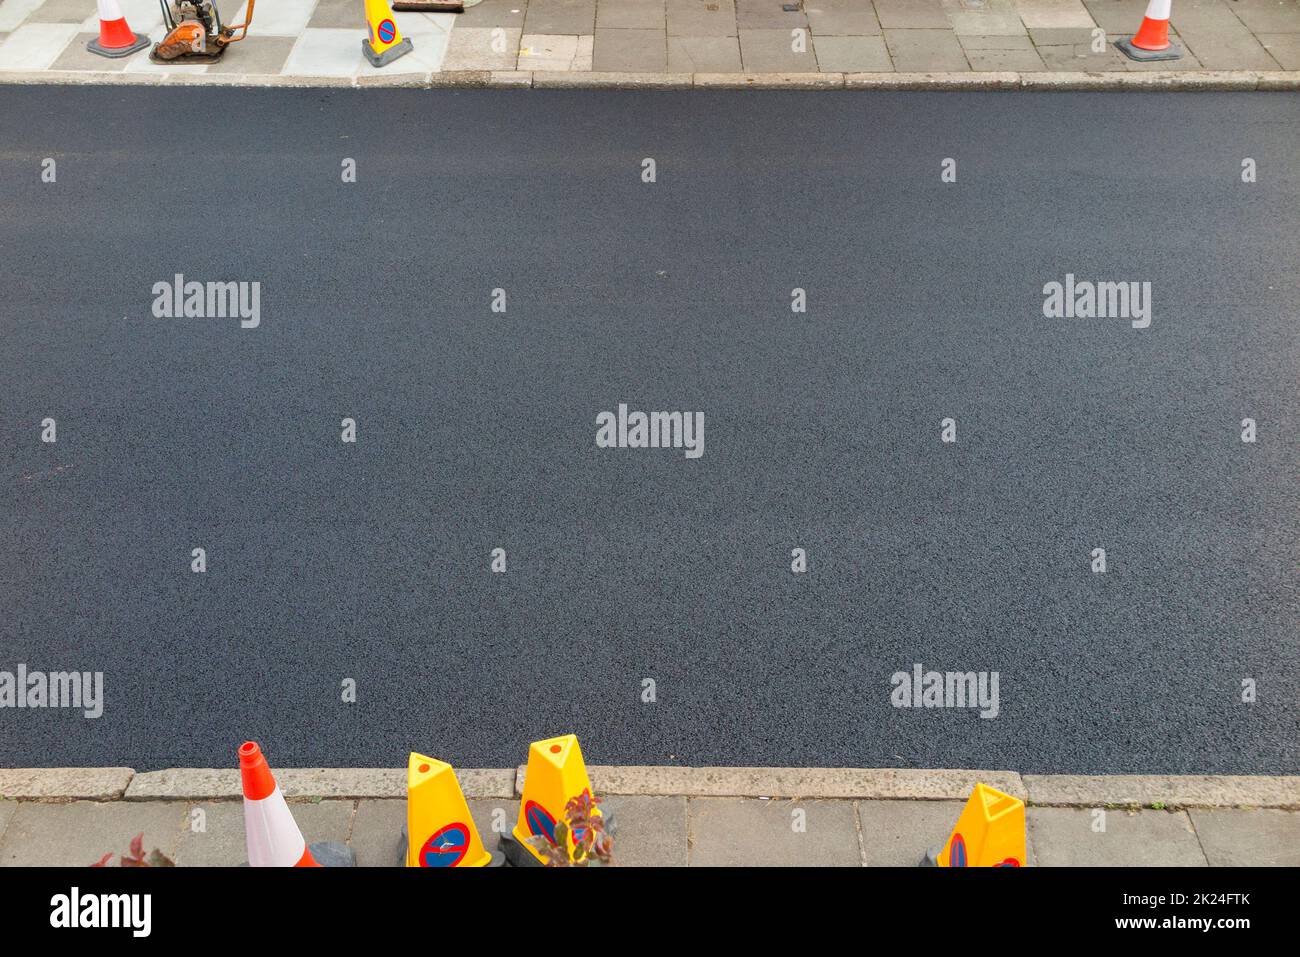 A beautiful fresh newly laid layer of hot fresh and smooth tarmac on the road just after a roller smoothing and rolling machine has rolled the tarmacadam. The new surface has been laid while resurfacing a residential Street in Twickenham, Greater London, UK. (132) Stock Photo